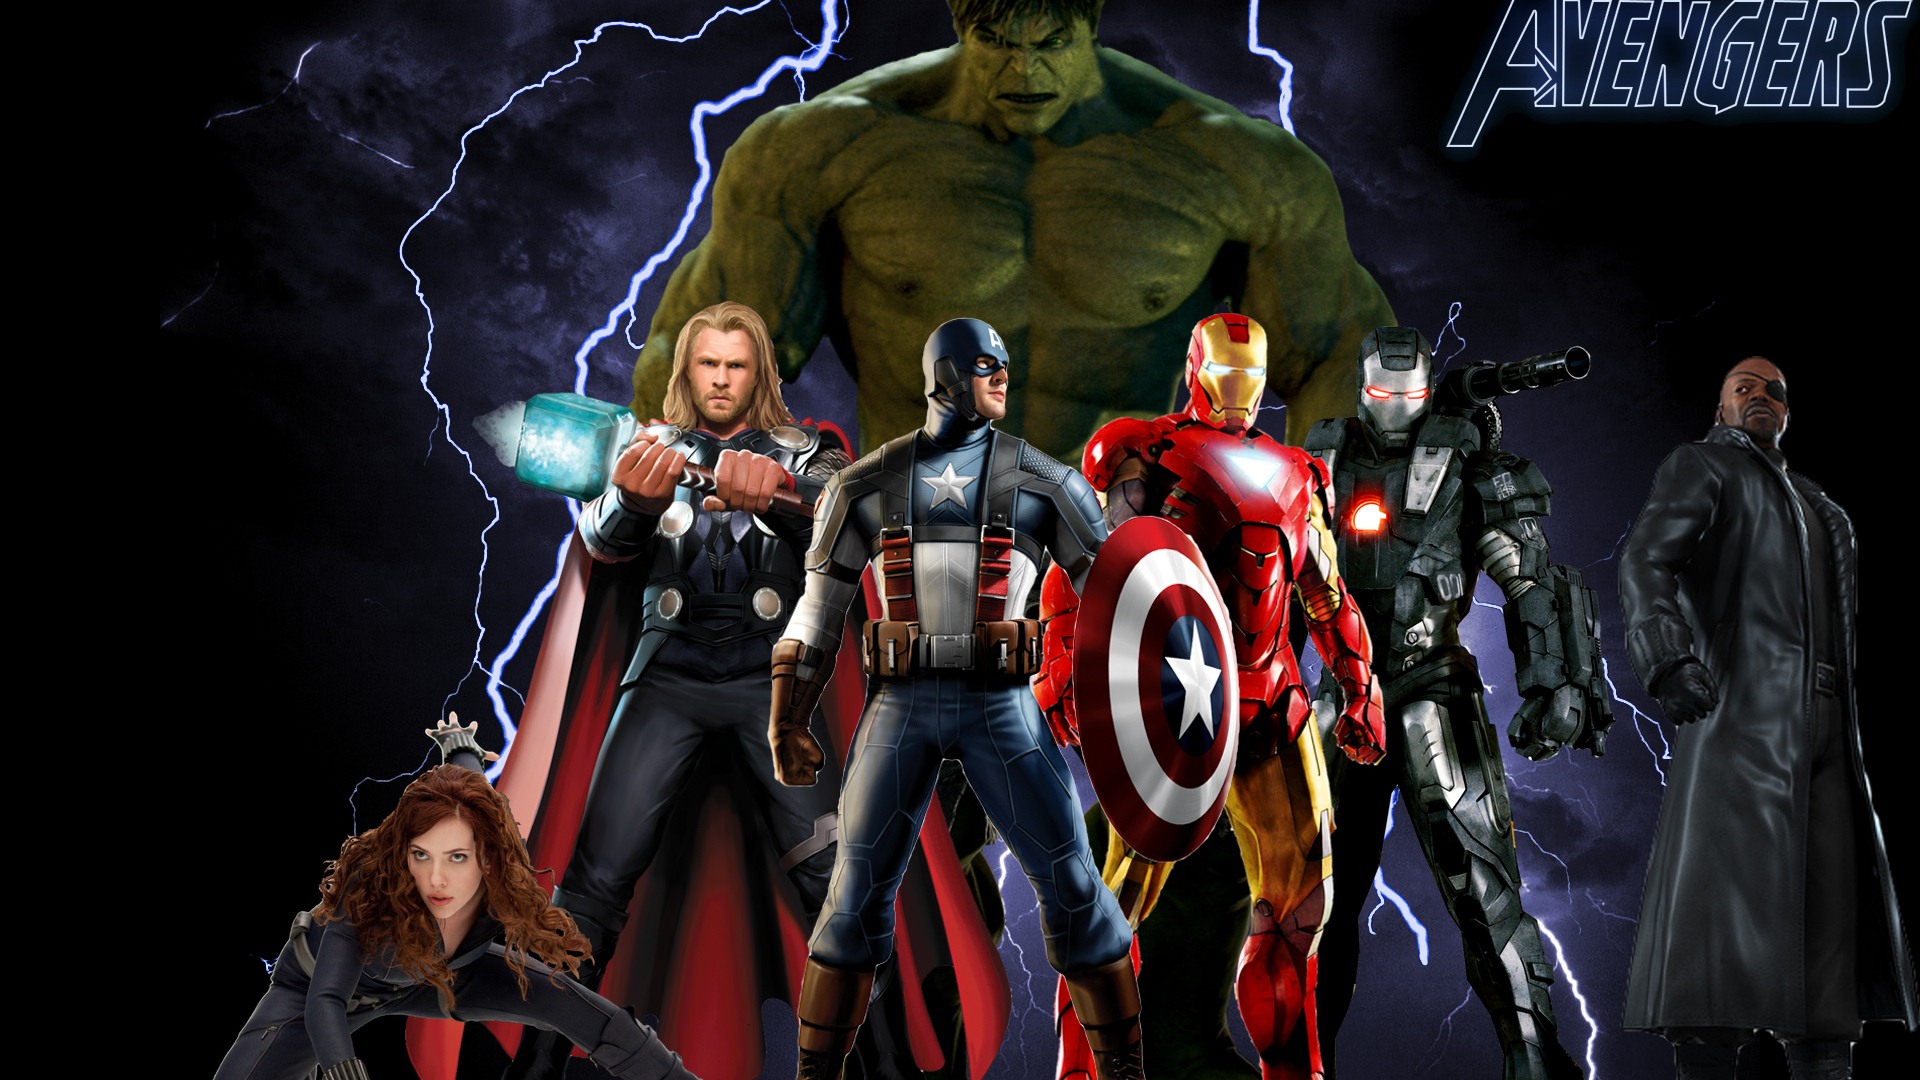 Watch The Avengers 2012 Full HD 1080p online free gomovies